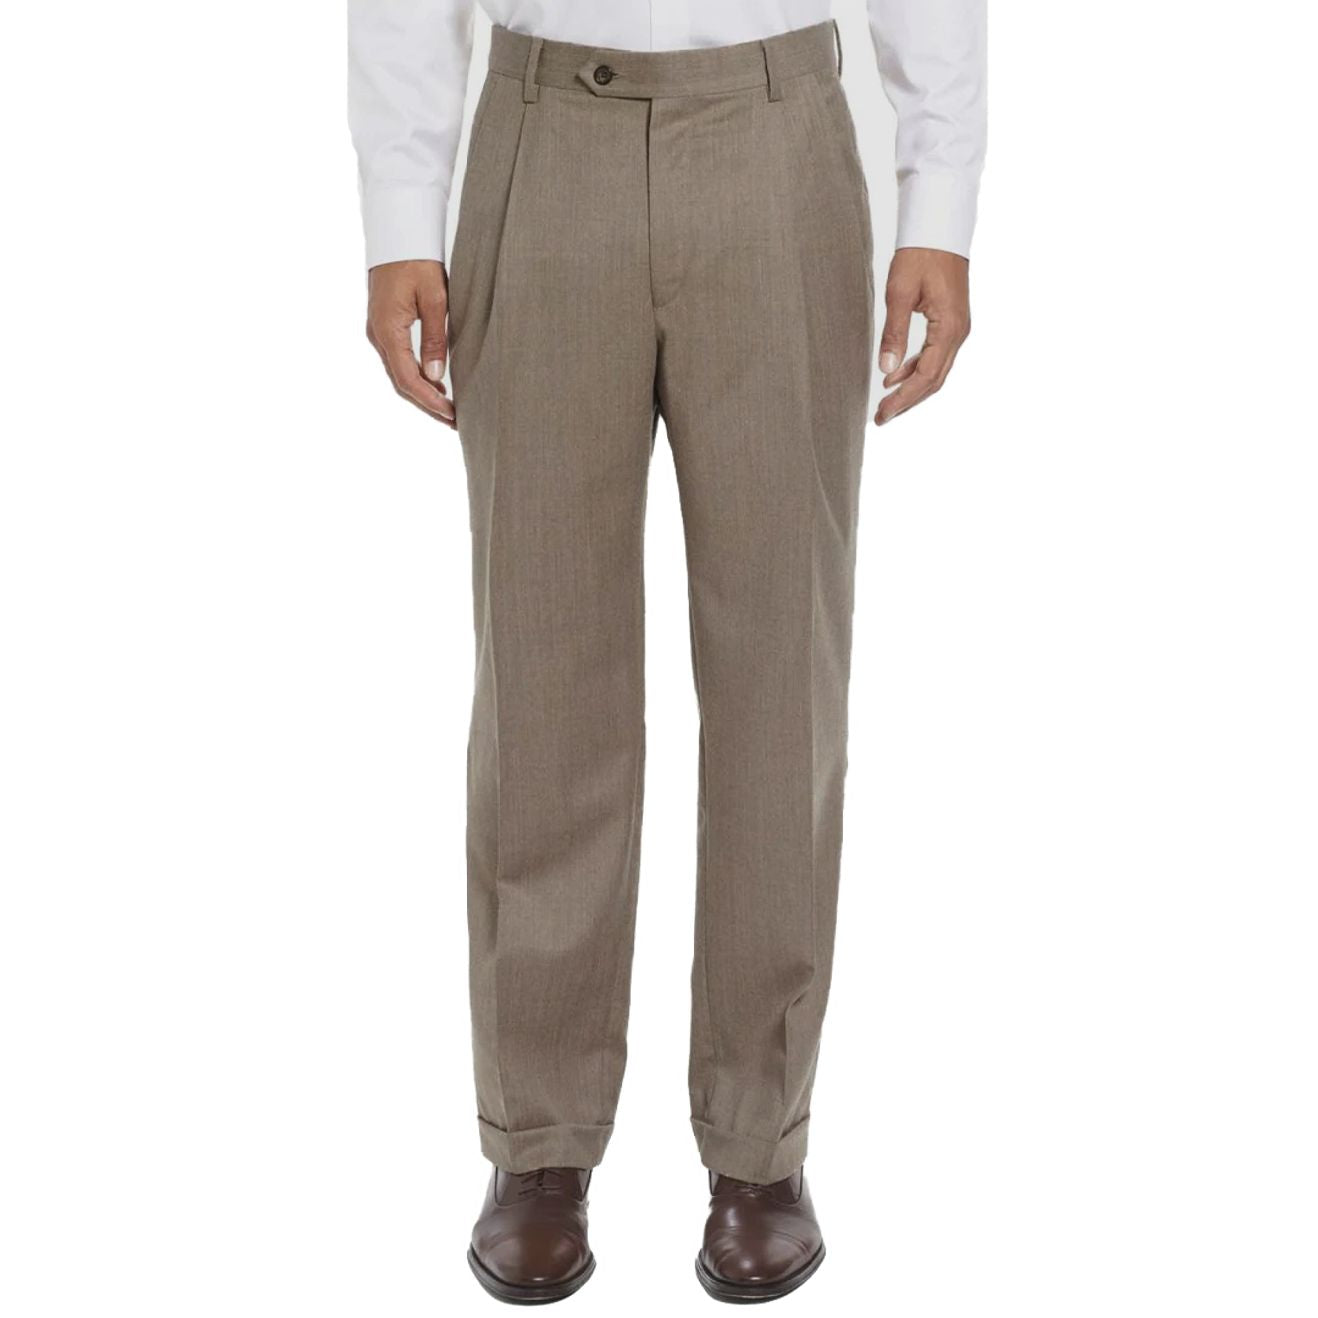 Super 100s Worsted Wool Flannel Trouser in Tan Heather (Milan Double Reverse Pleat) by Berle